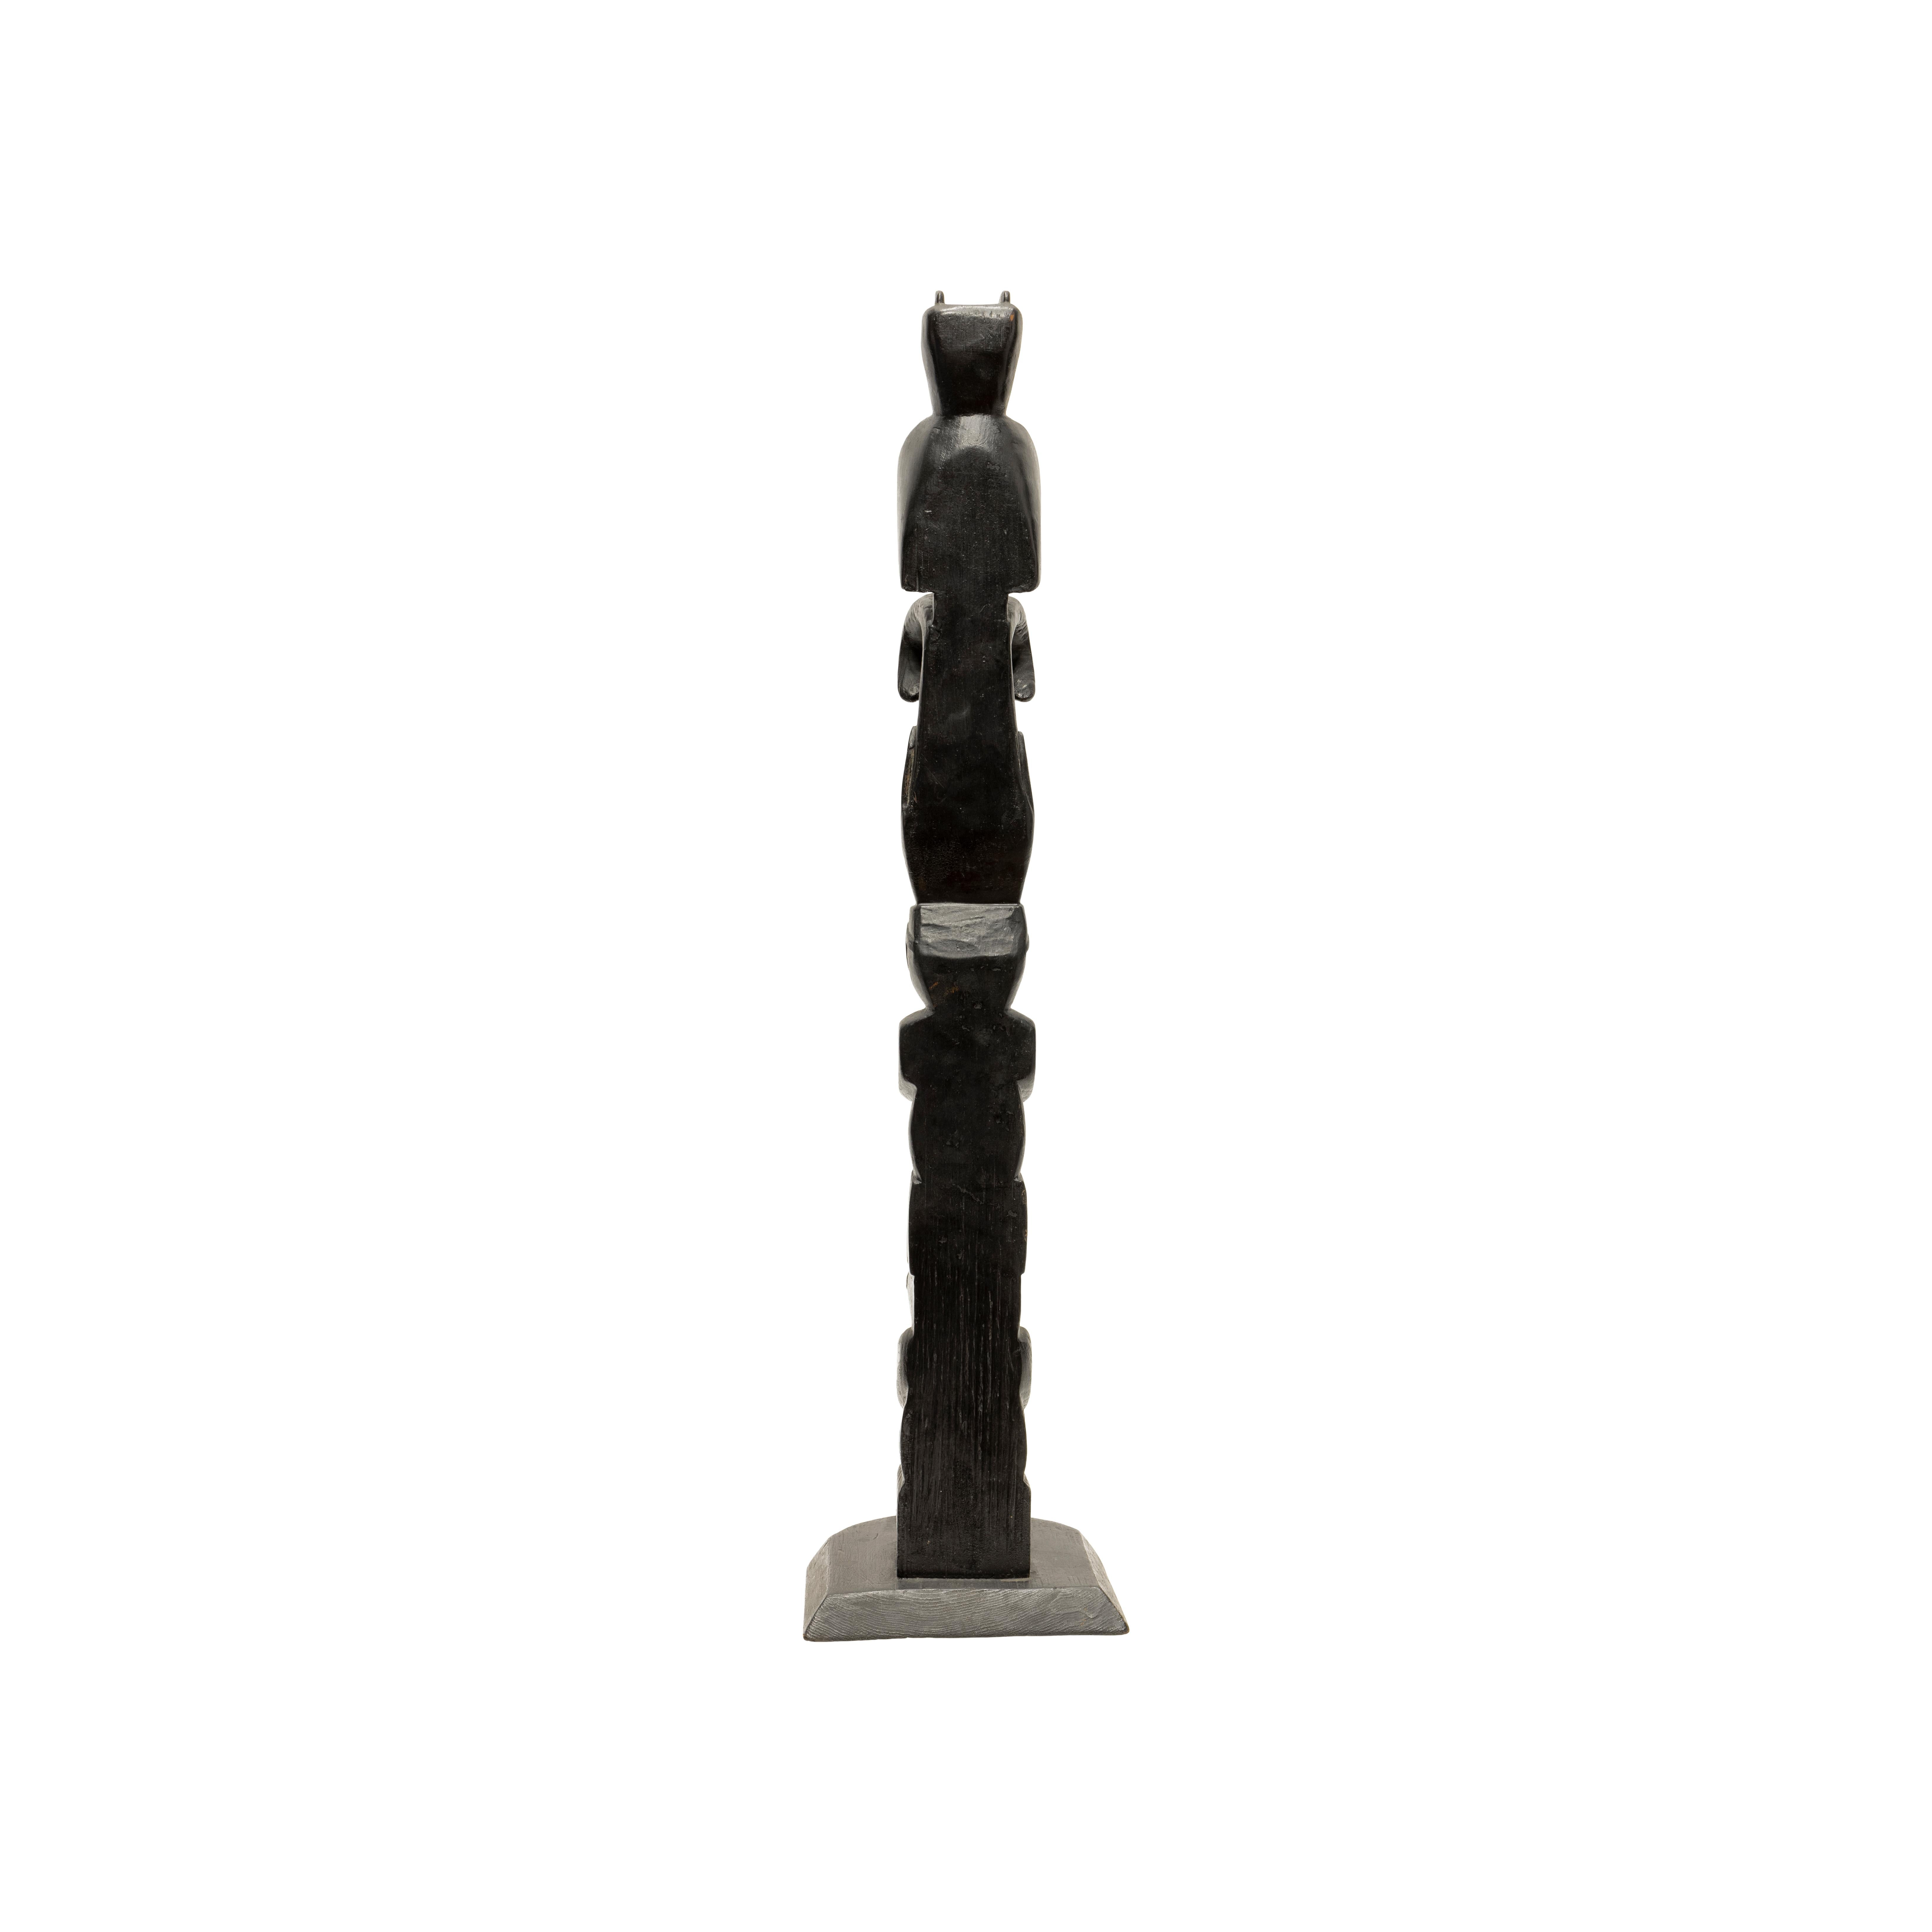 Northwest four figure totem from British Columbia. Old black paint and integral base. Great condition and just the right size. Northwest Coast art, consisting of totem poles, posts or pillars, carved with symbols or figures. They are usually made